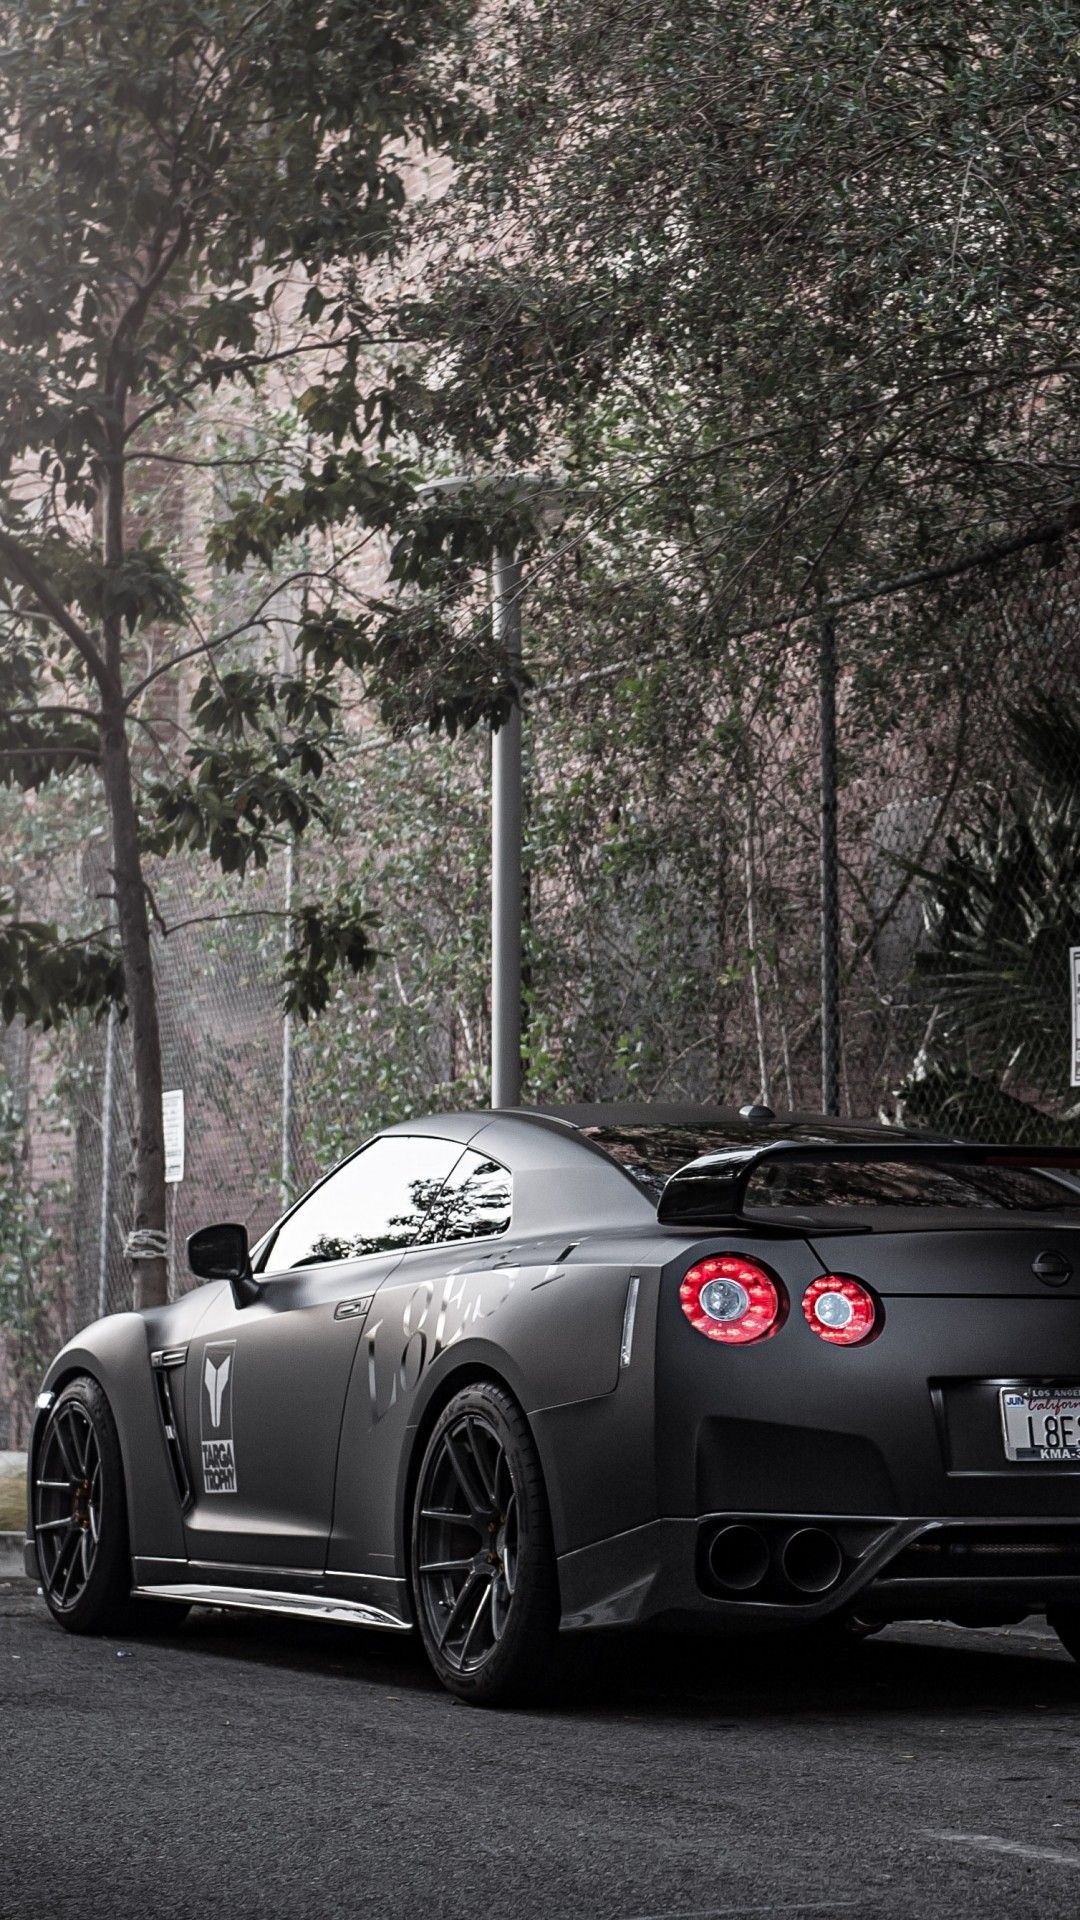 Nissan Gtr Wallpaper background picture